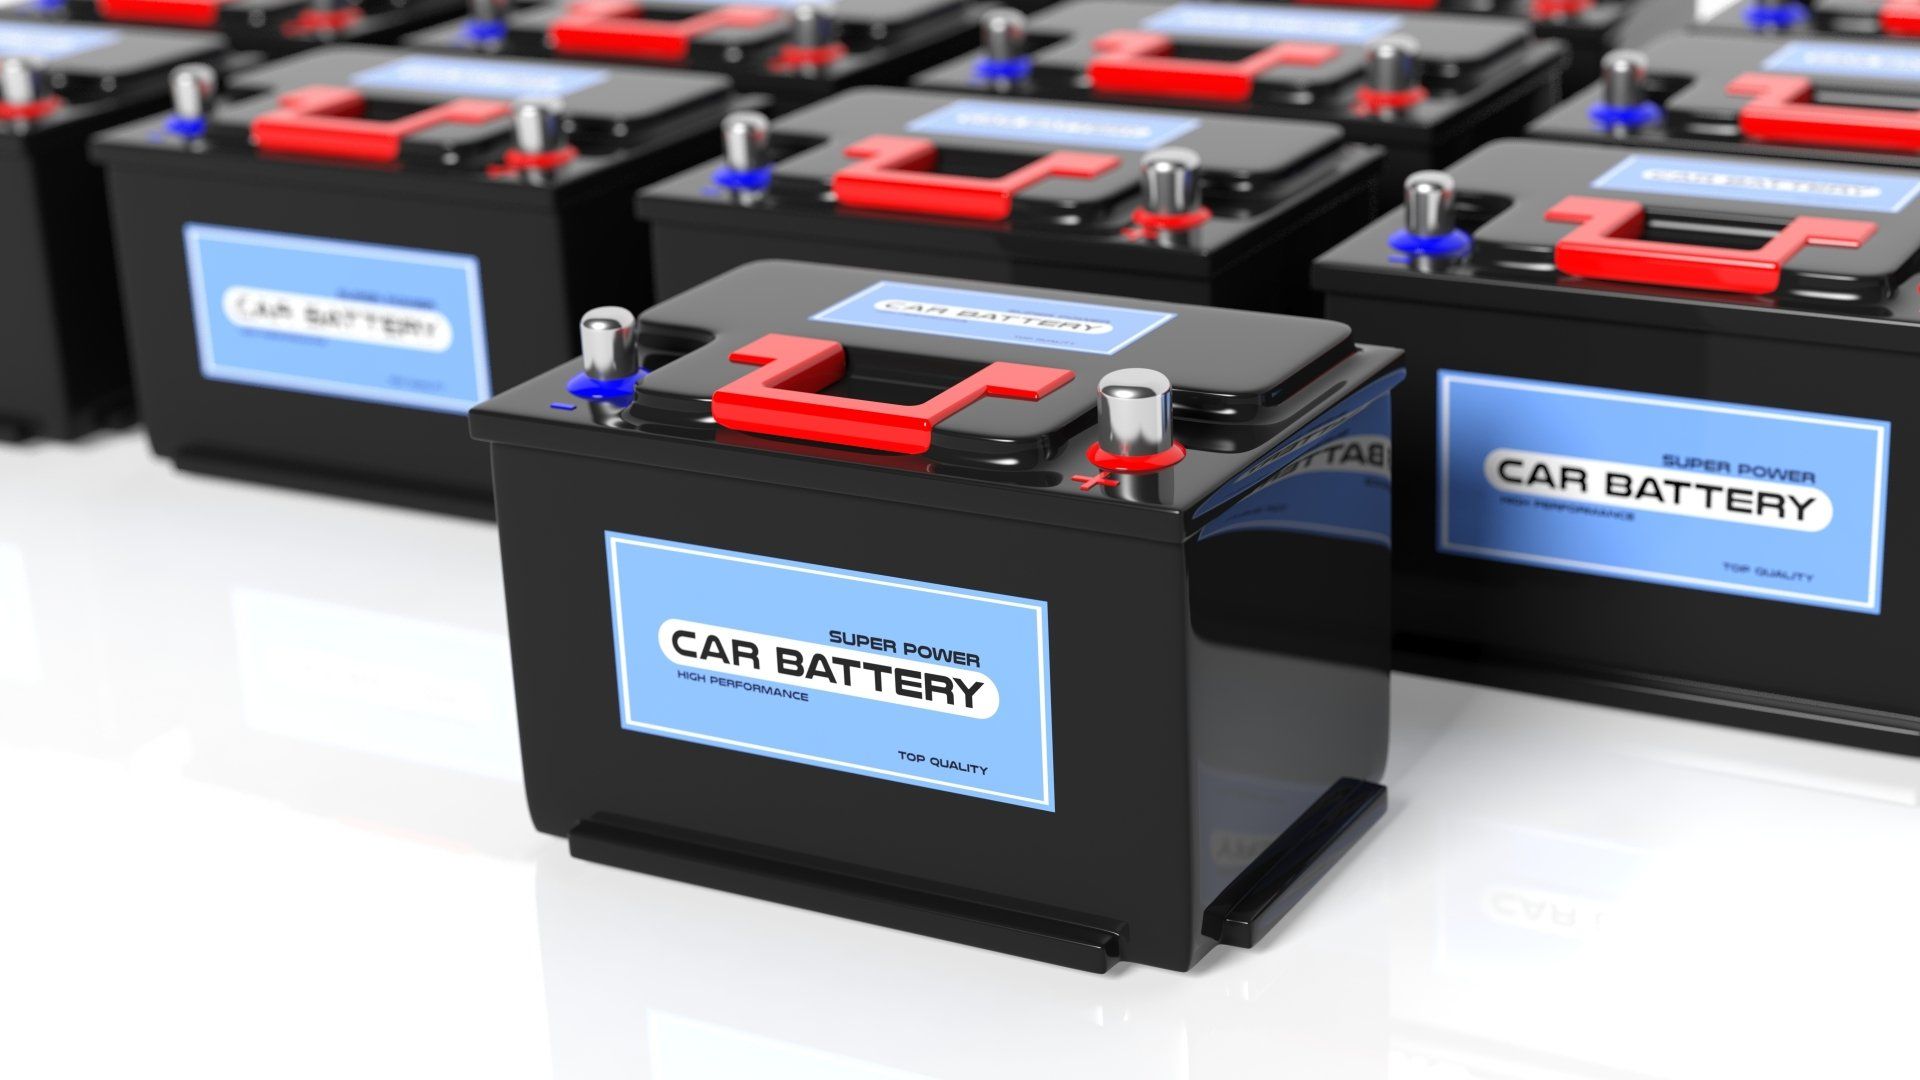 Let's Learn More About Maintenance Free Battery